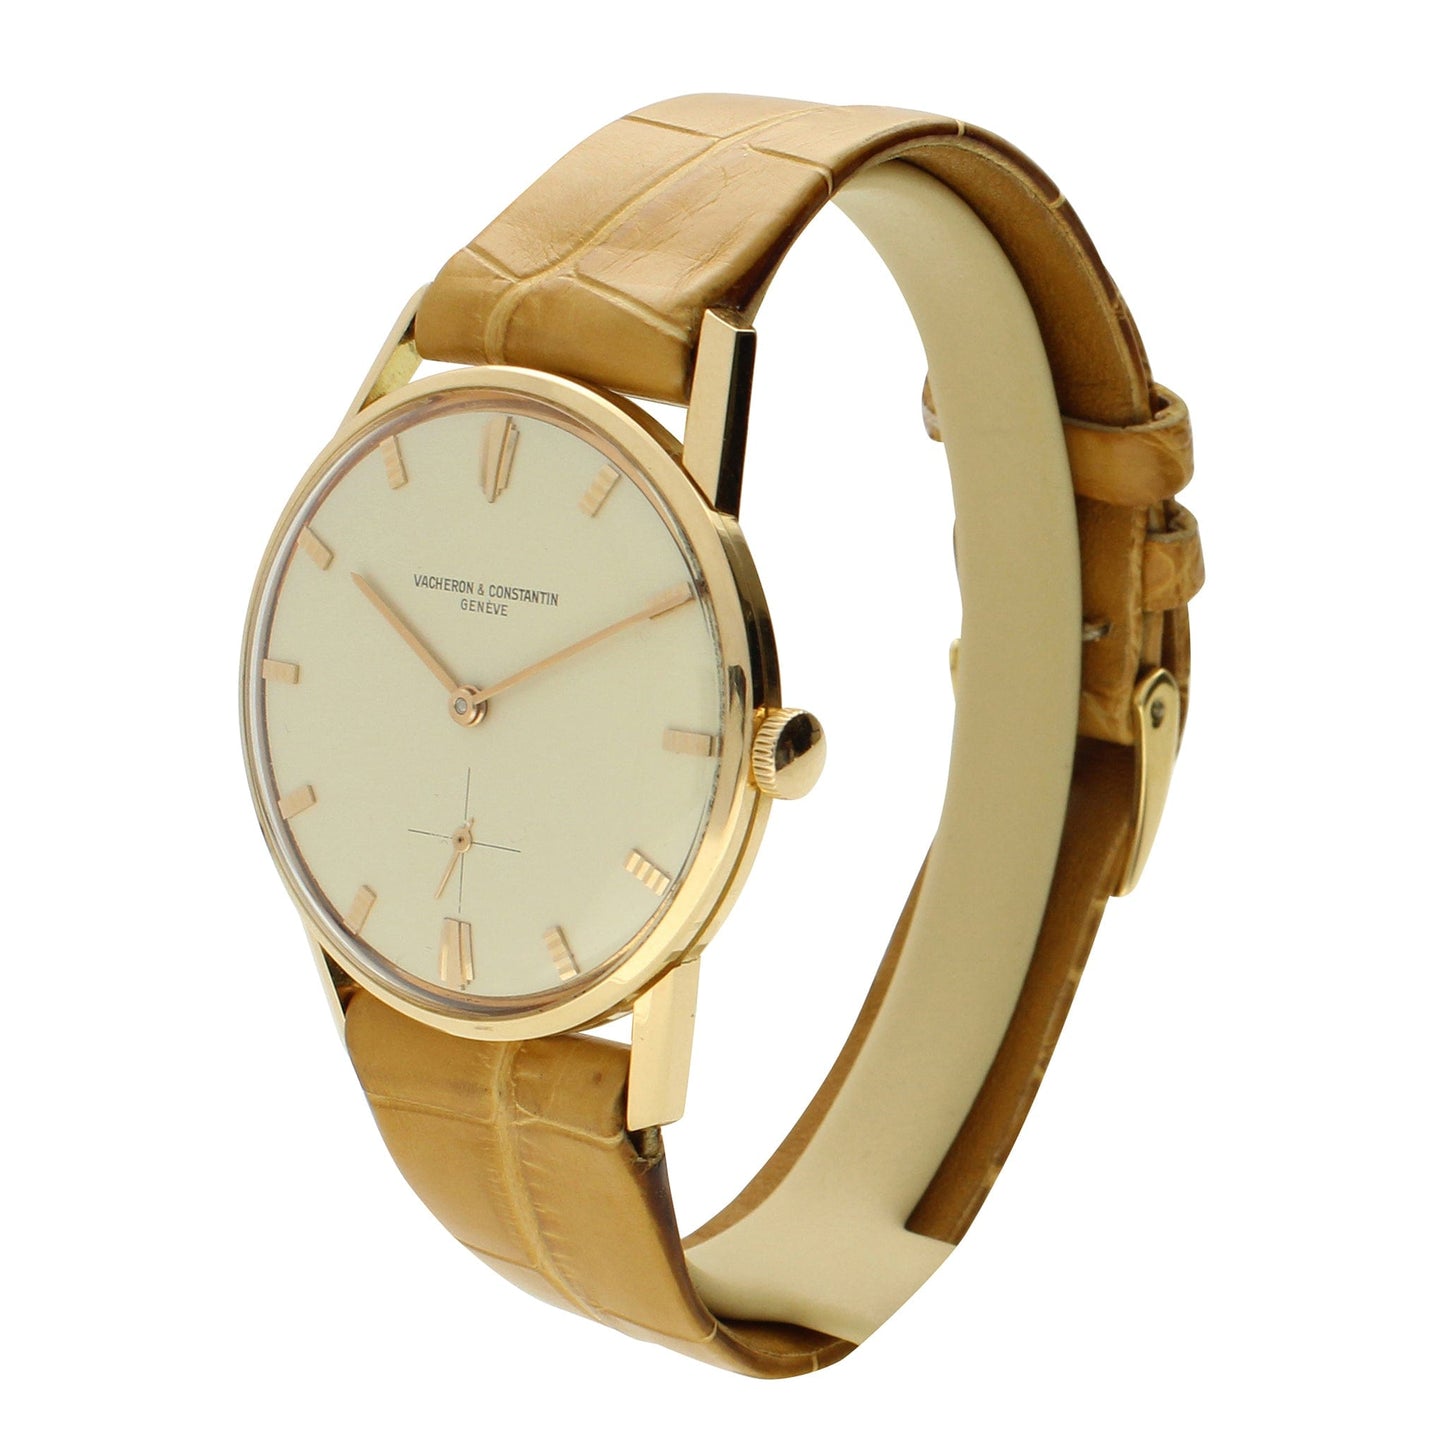 18ct rose gold, reference 6484 wristwatch. Made 1950's